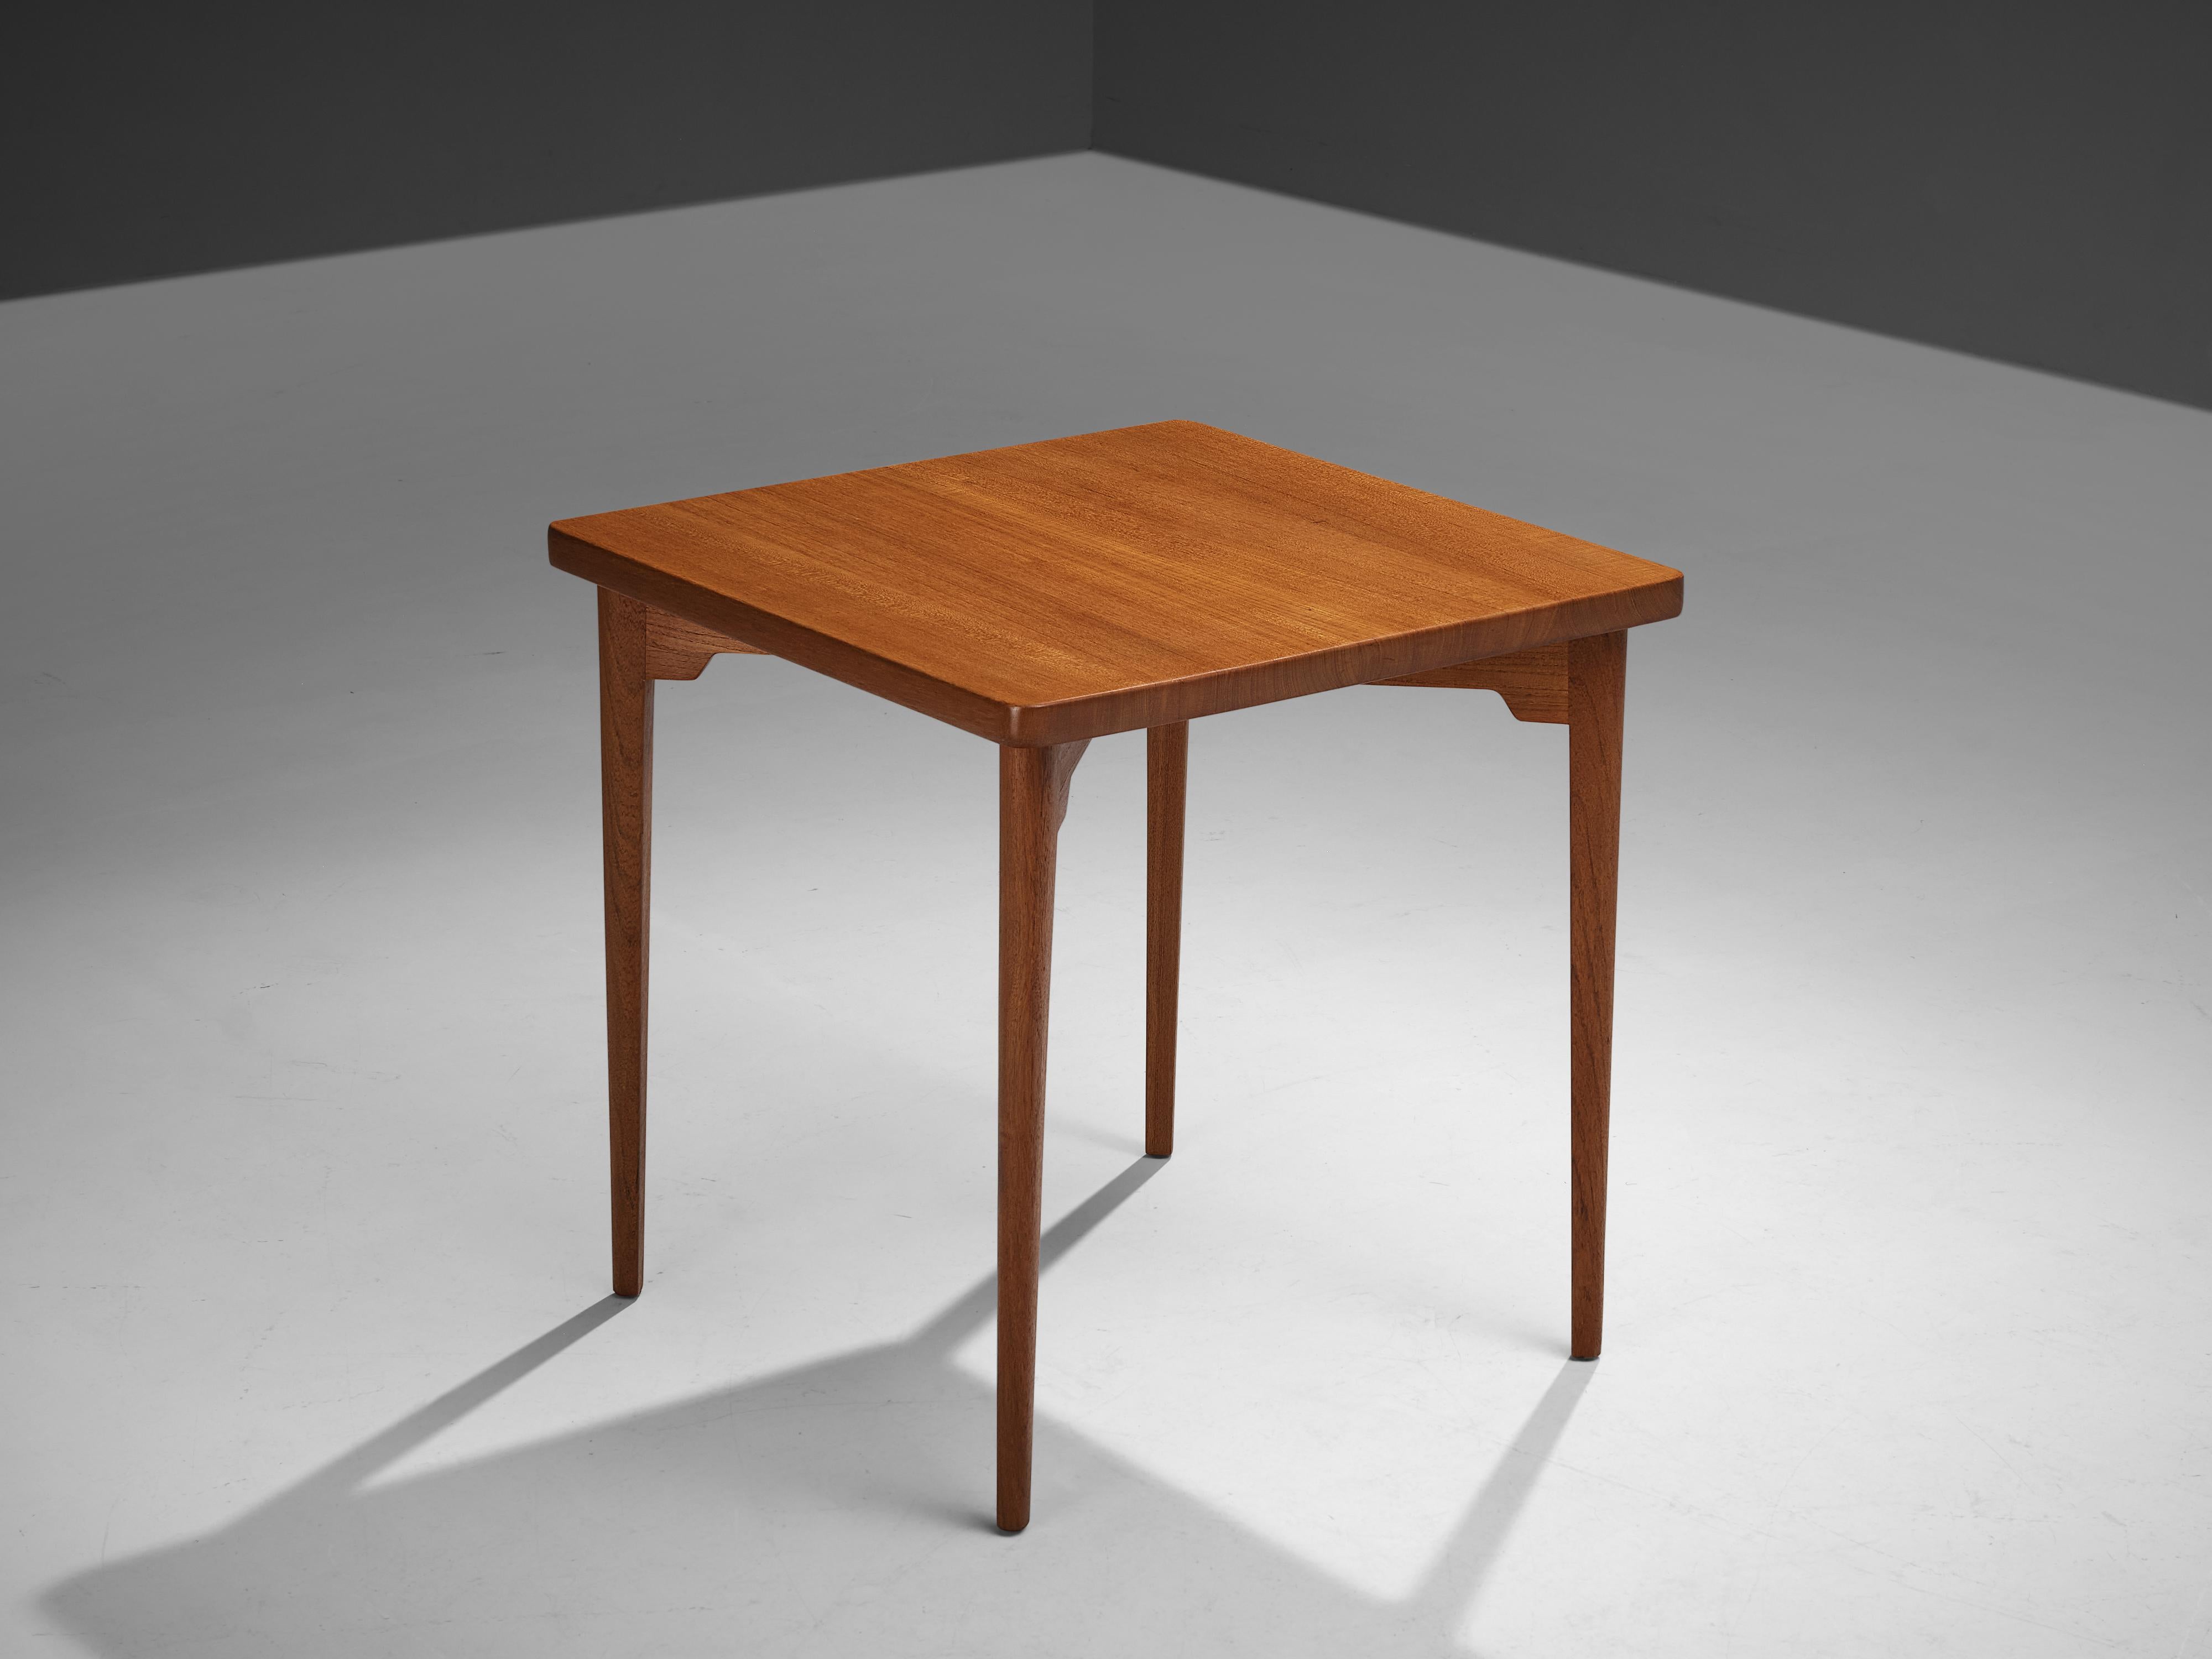 Palle Suenson, side table, teak, Denmark, c. 1940  

Striking Scandinavian Modern side table by Danish architect and designer Palle Suenson (1904-1987). This particular table is specifically designed for the new office building of Aarhus Oil Fabrik